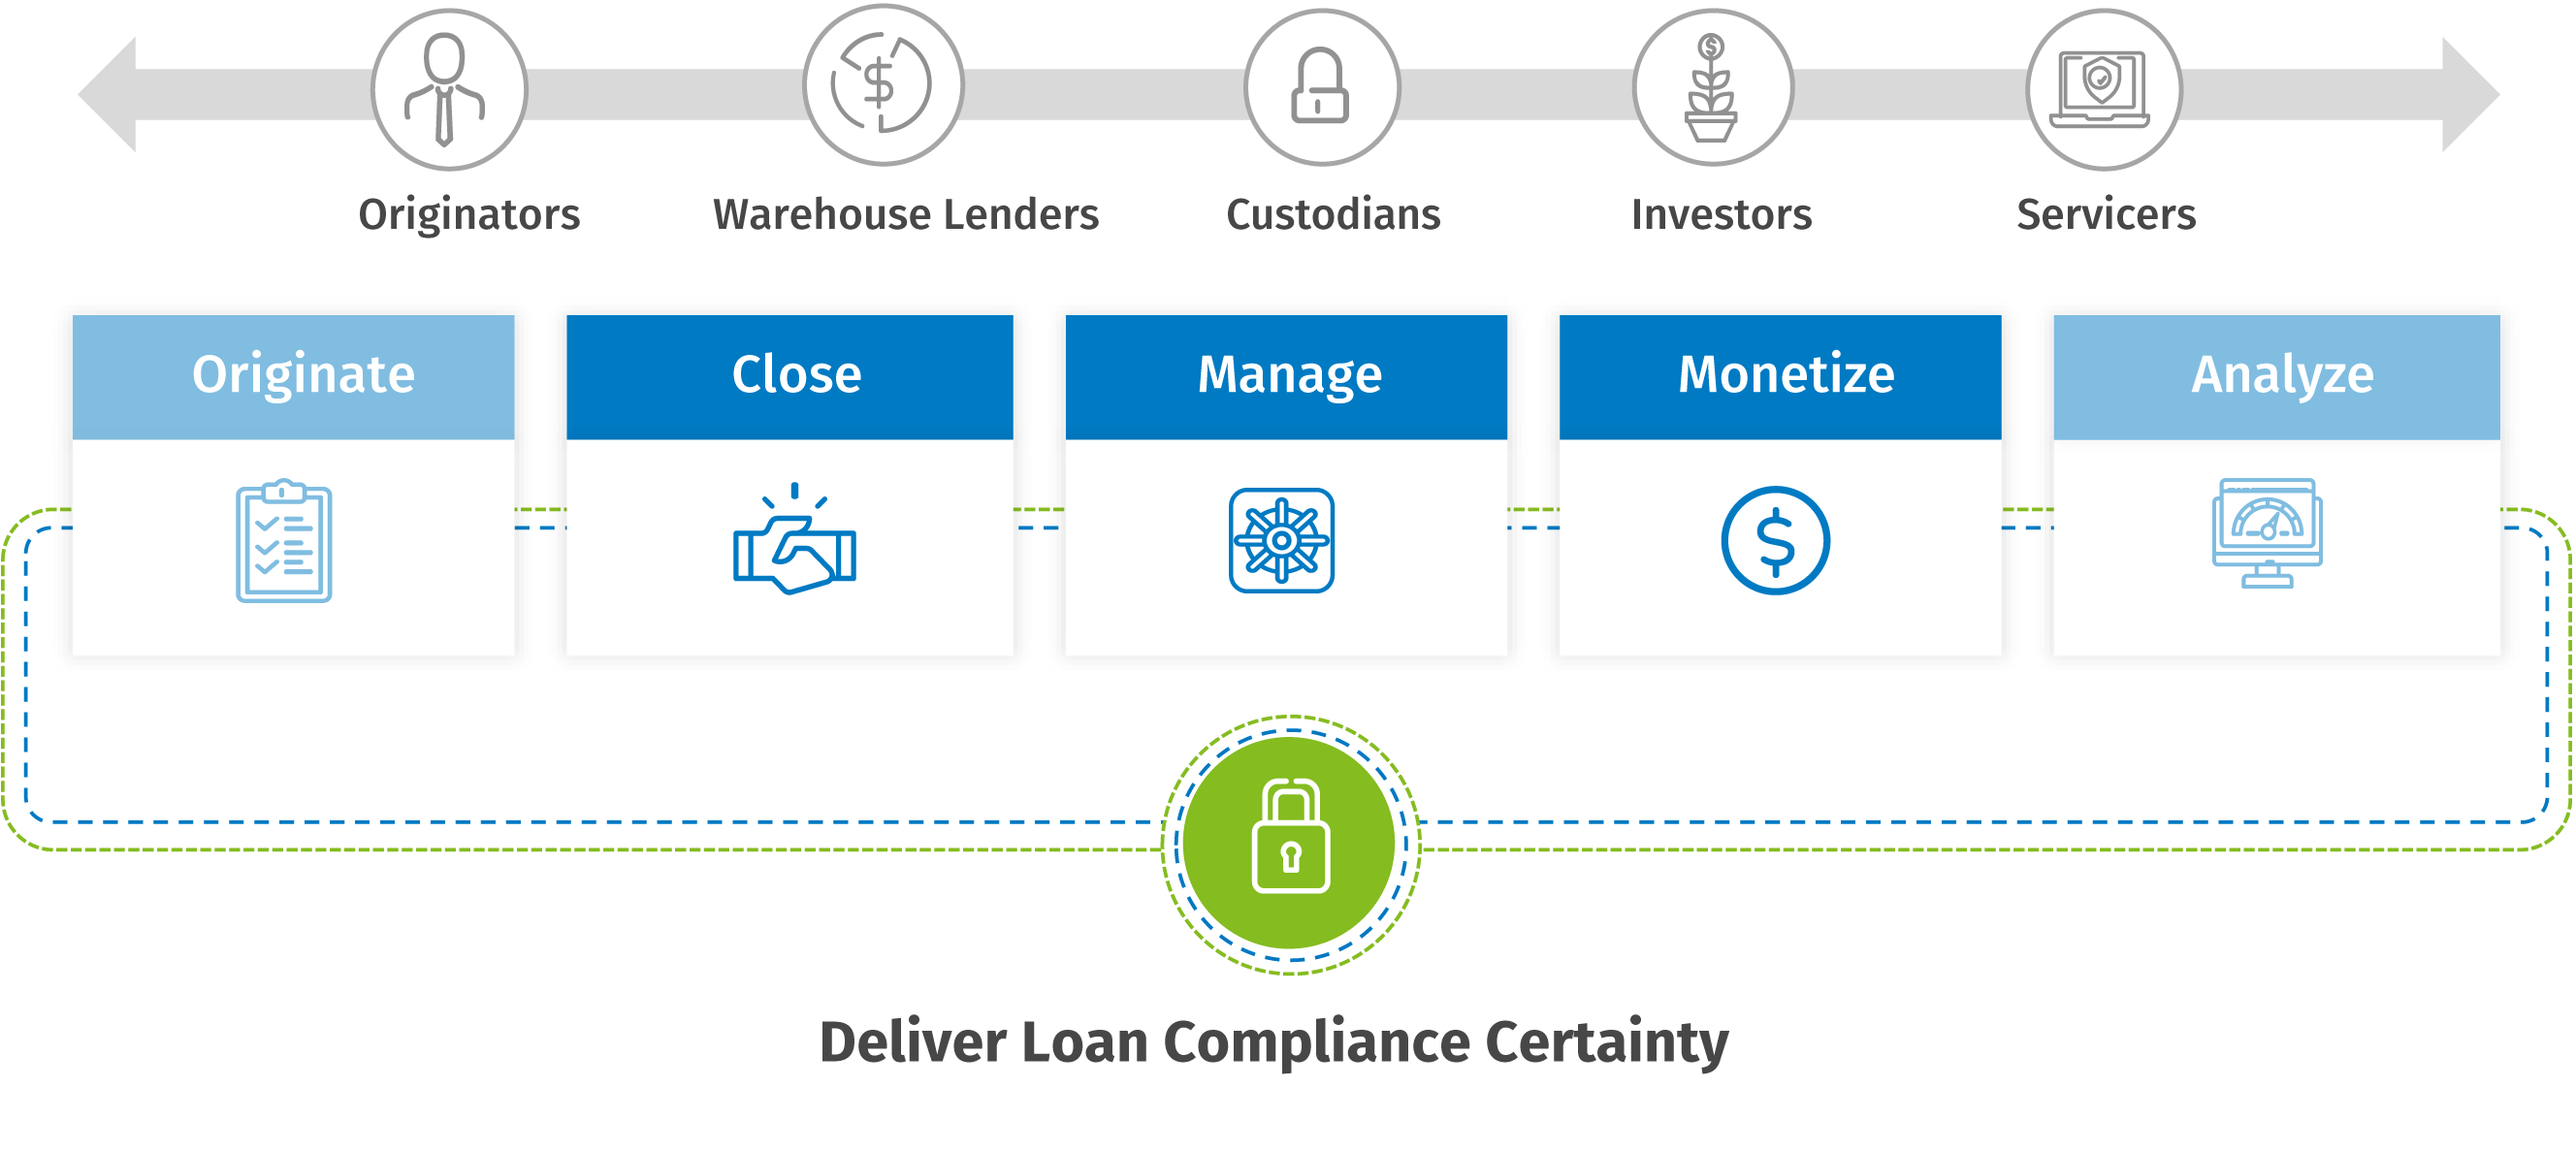 Deliver Loan Compliance Certaninty